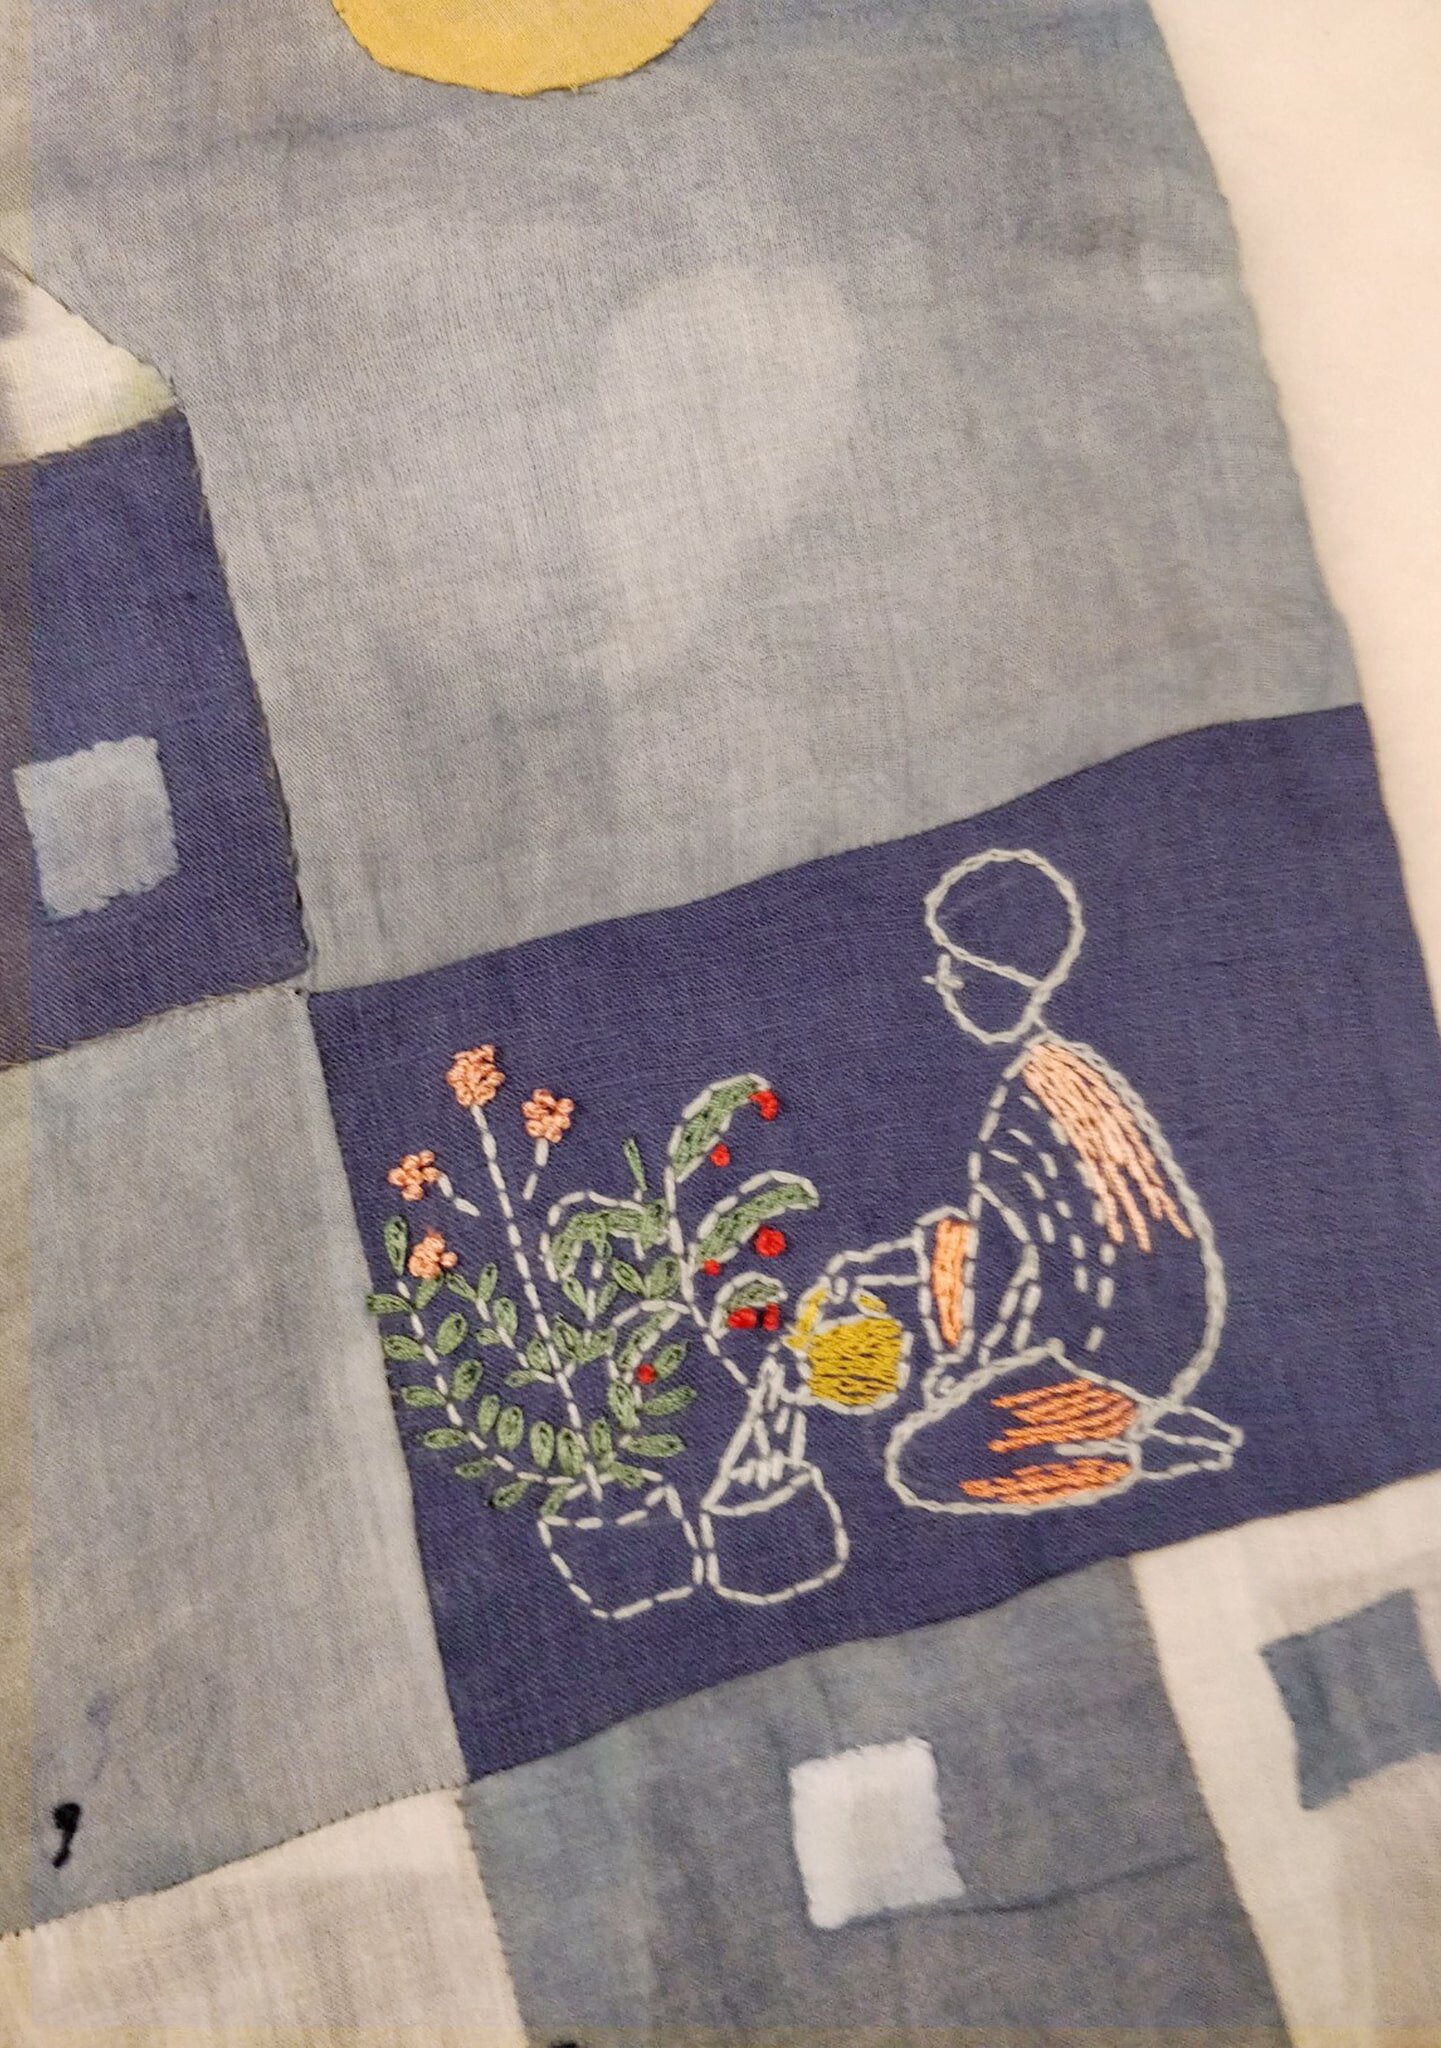  Crafts: Patchwork, embroidery, and natural dyeing using indigo, coffee, and onion peels from kitchen waste 